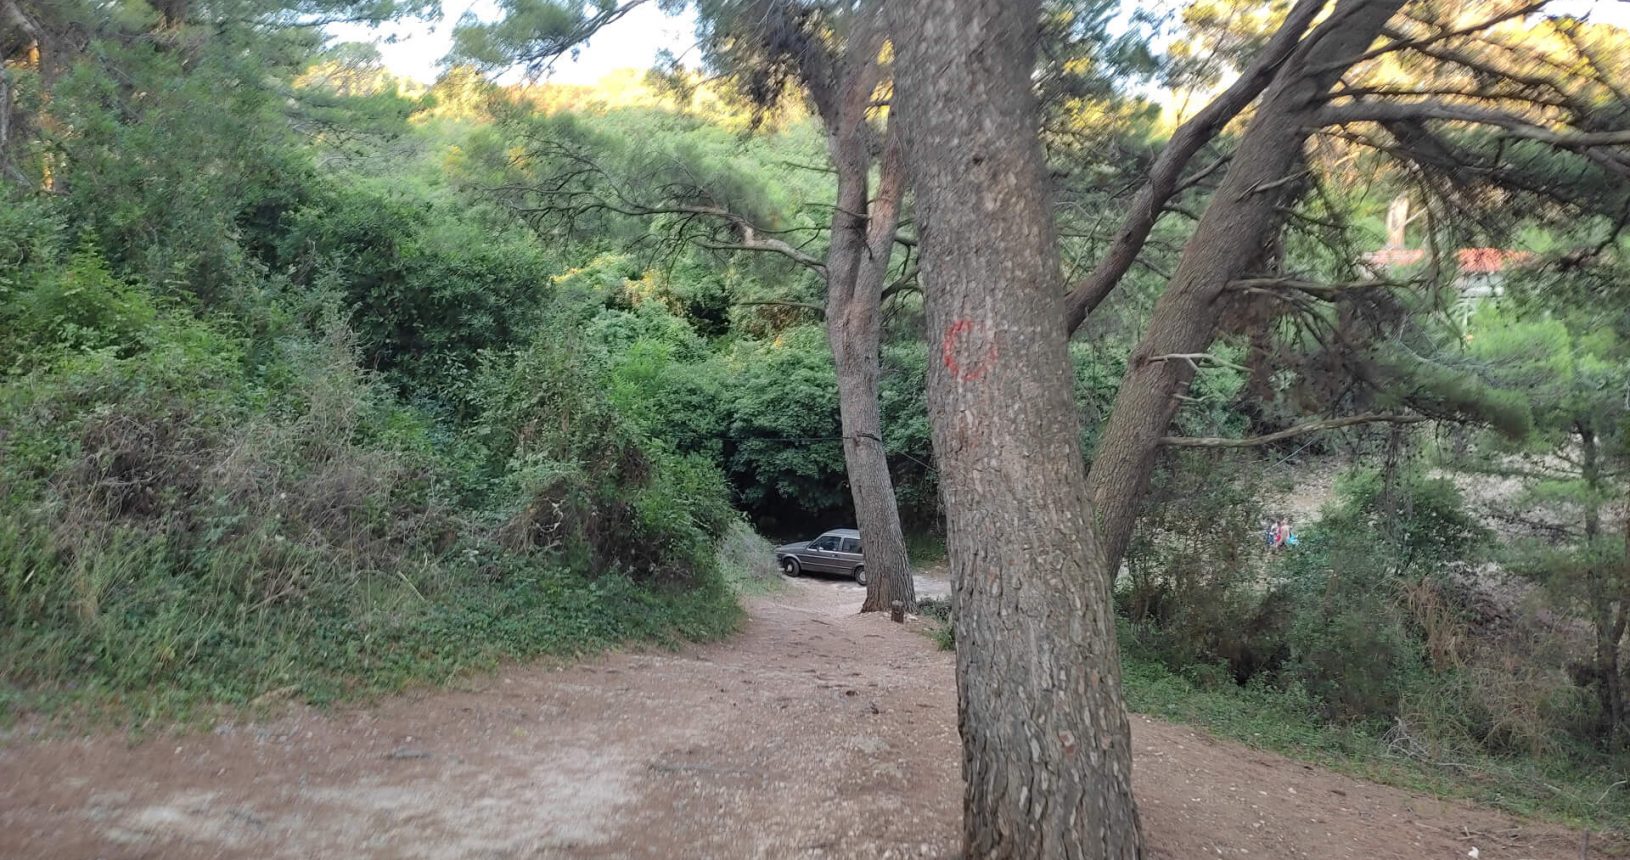 Car in the forest at Ulcinj hiking trail